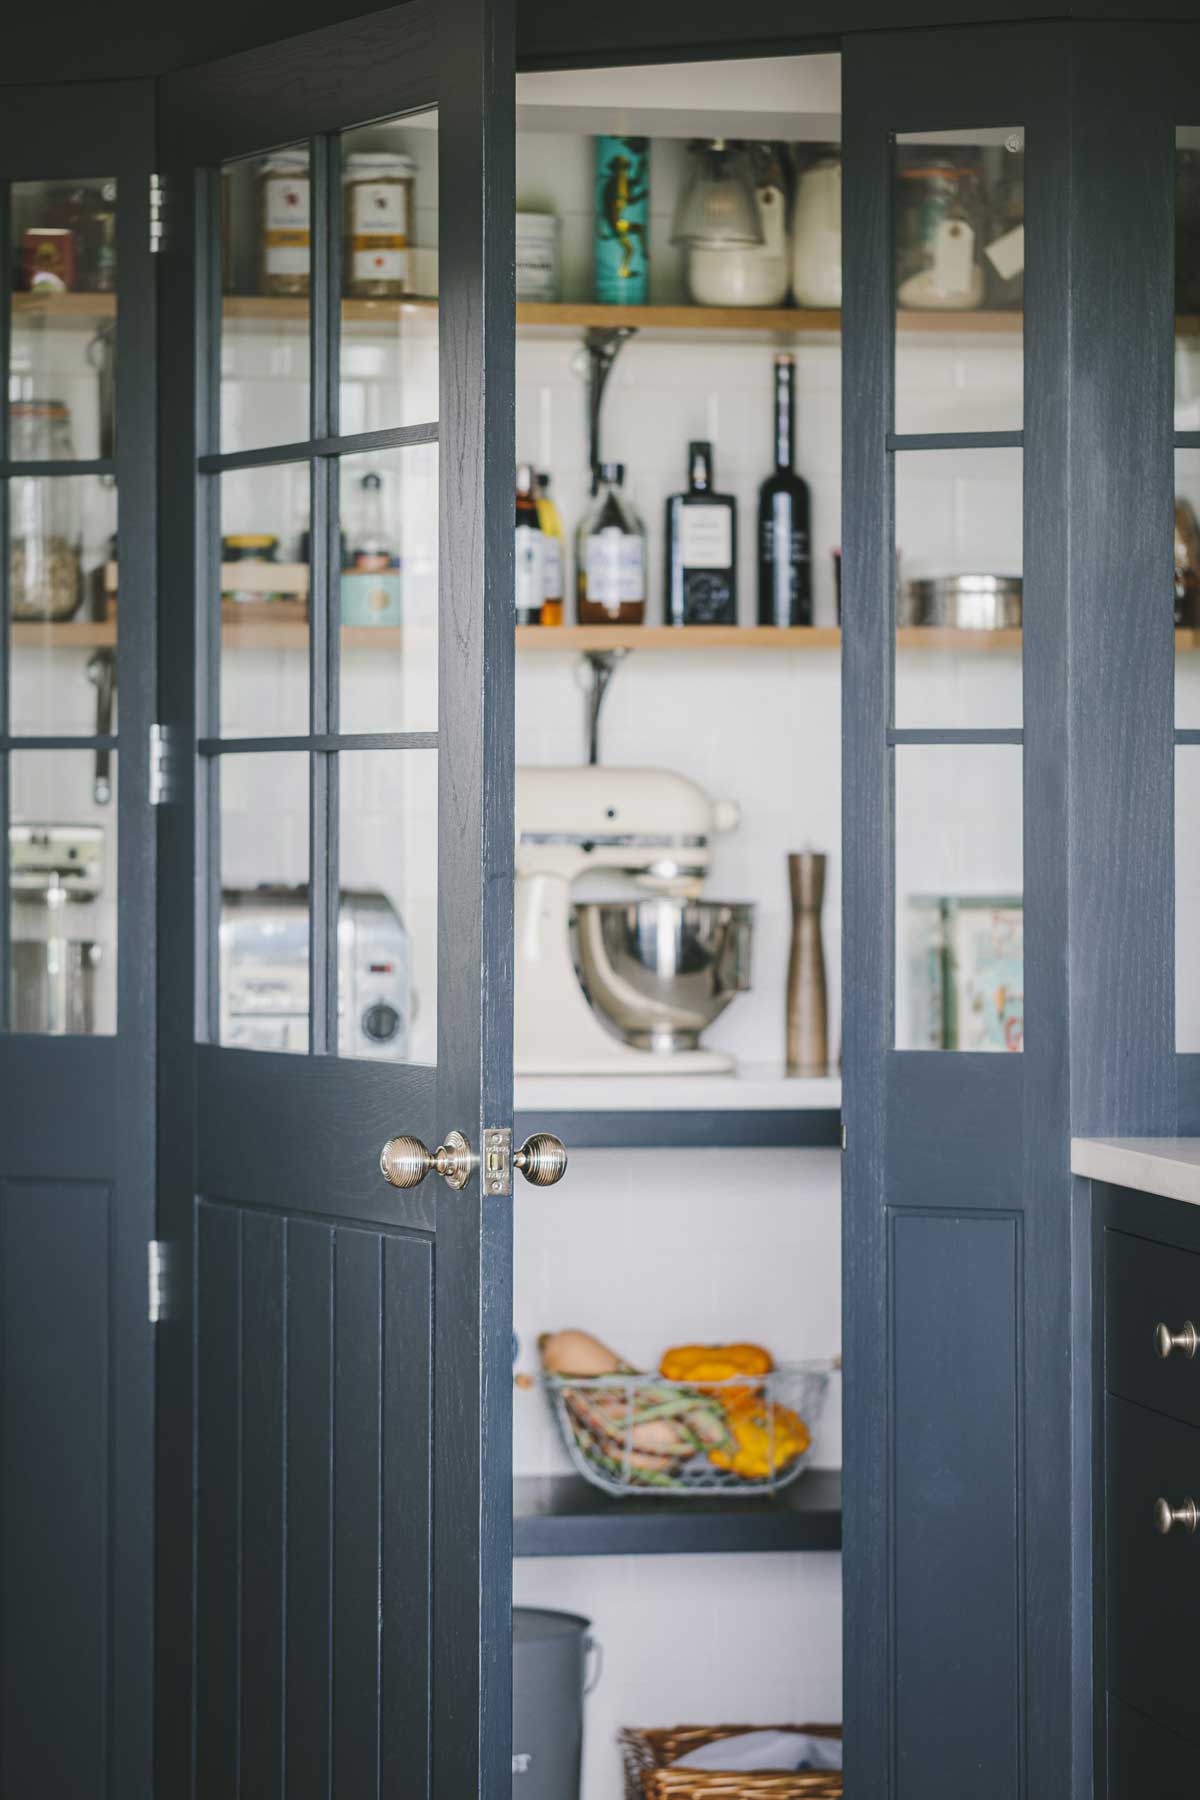 MANOR FARM KITCHEN - With walk in pantry in farrow and ball railings colour